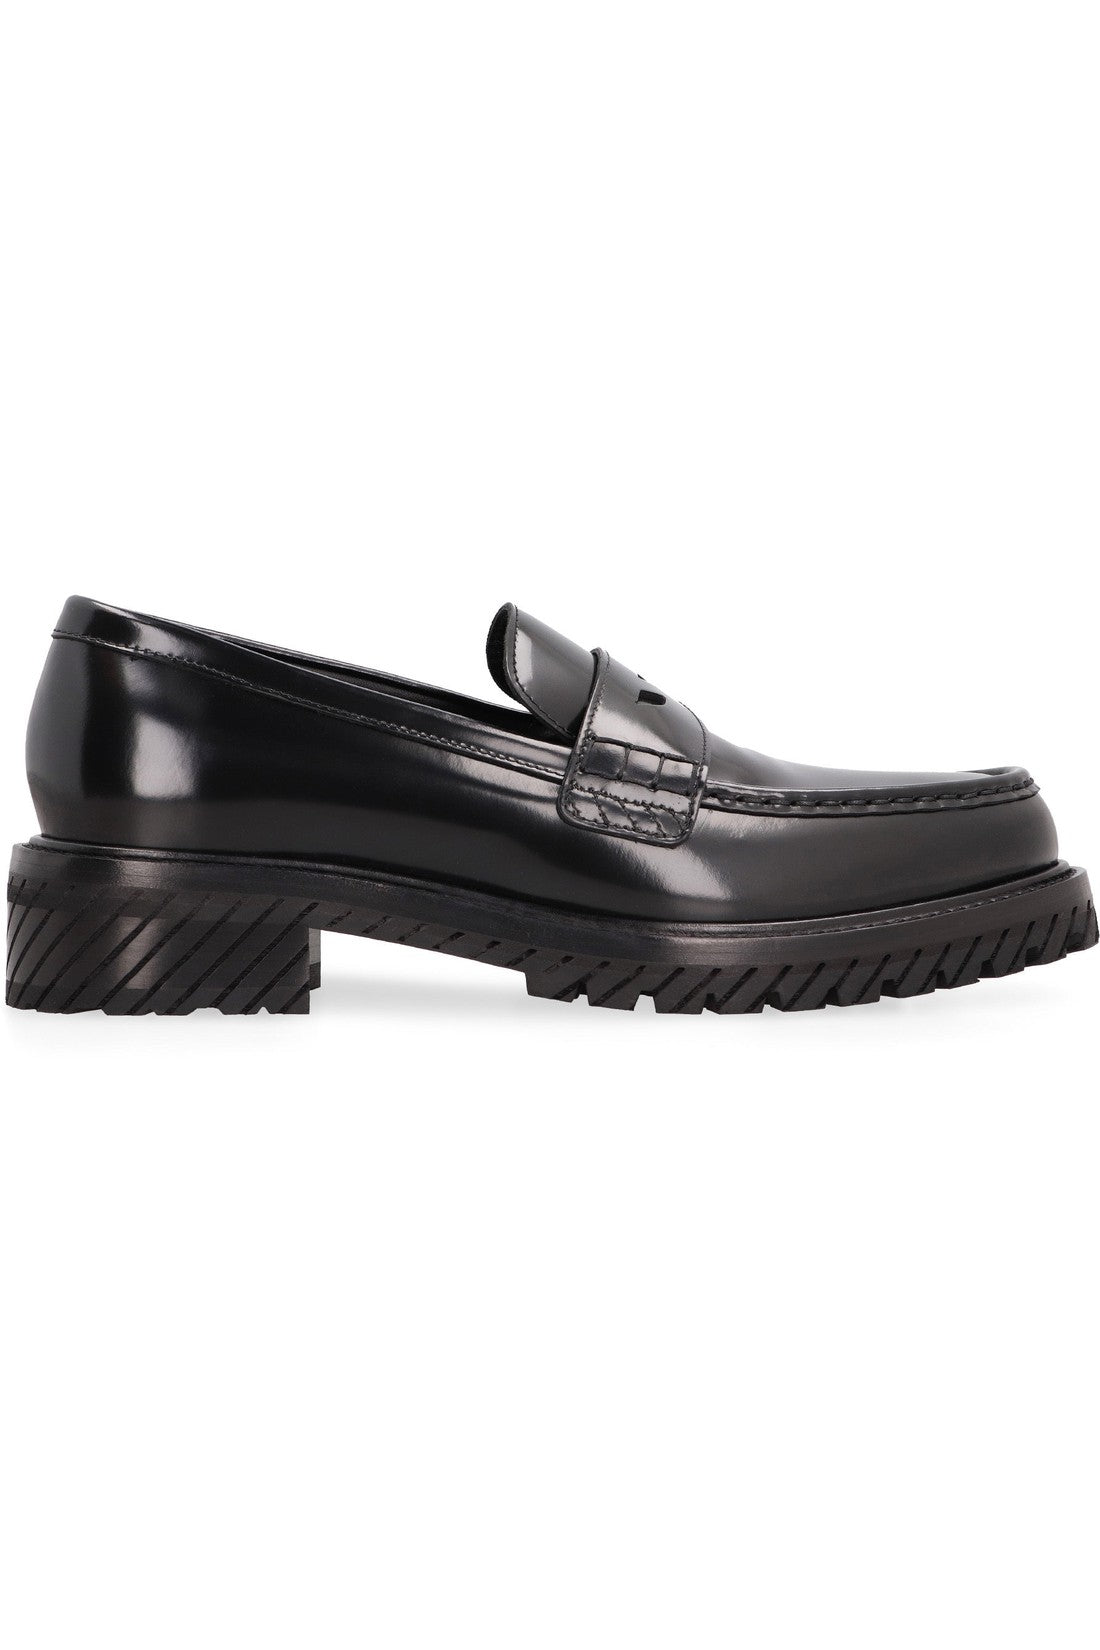 Off-White-OUTLET-SALE-Combat leather loafers-ARCHIVIST